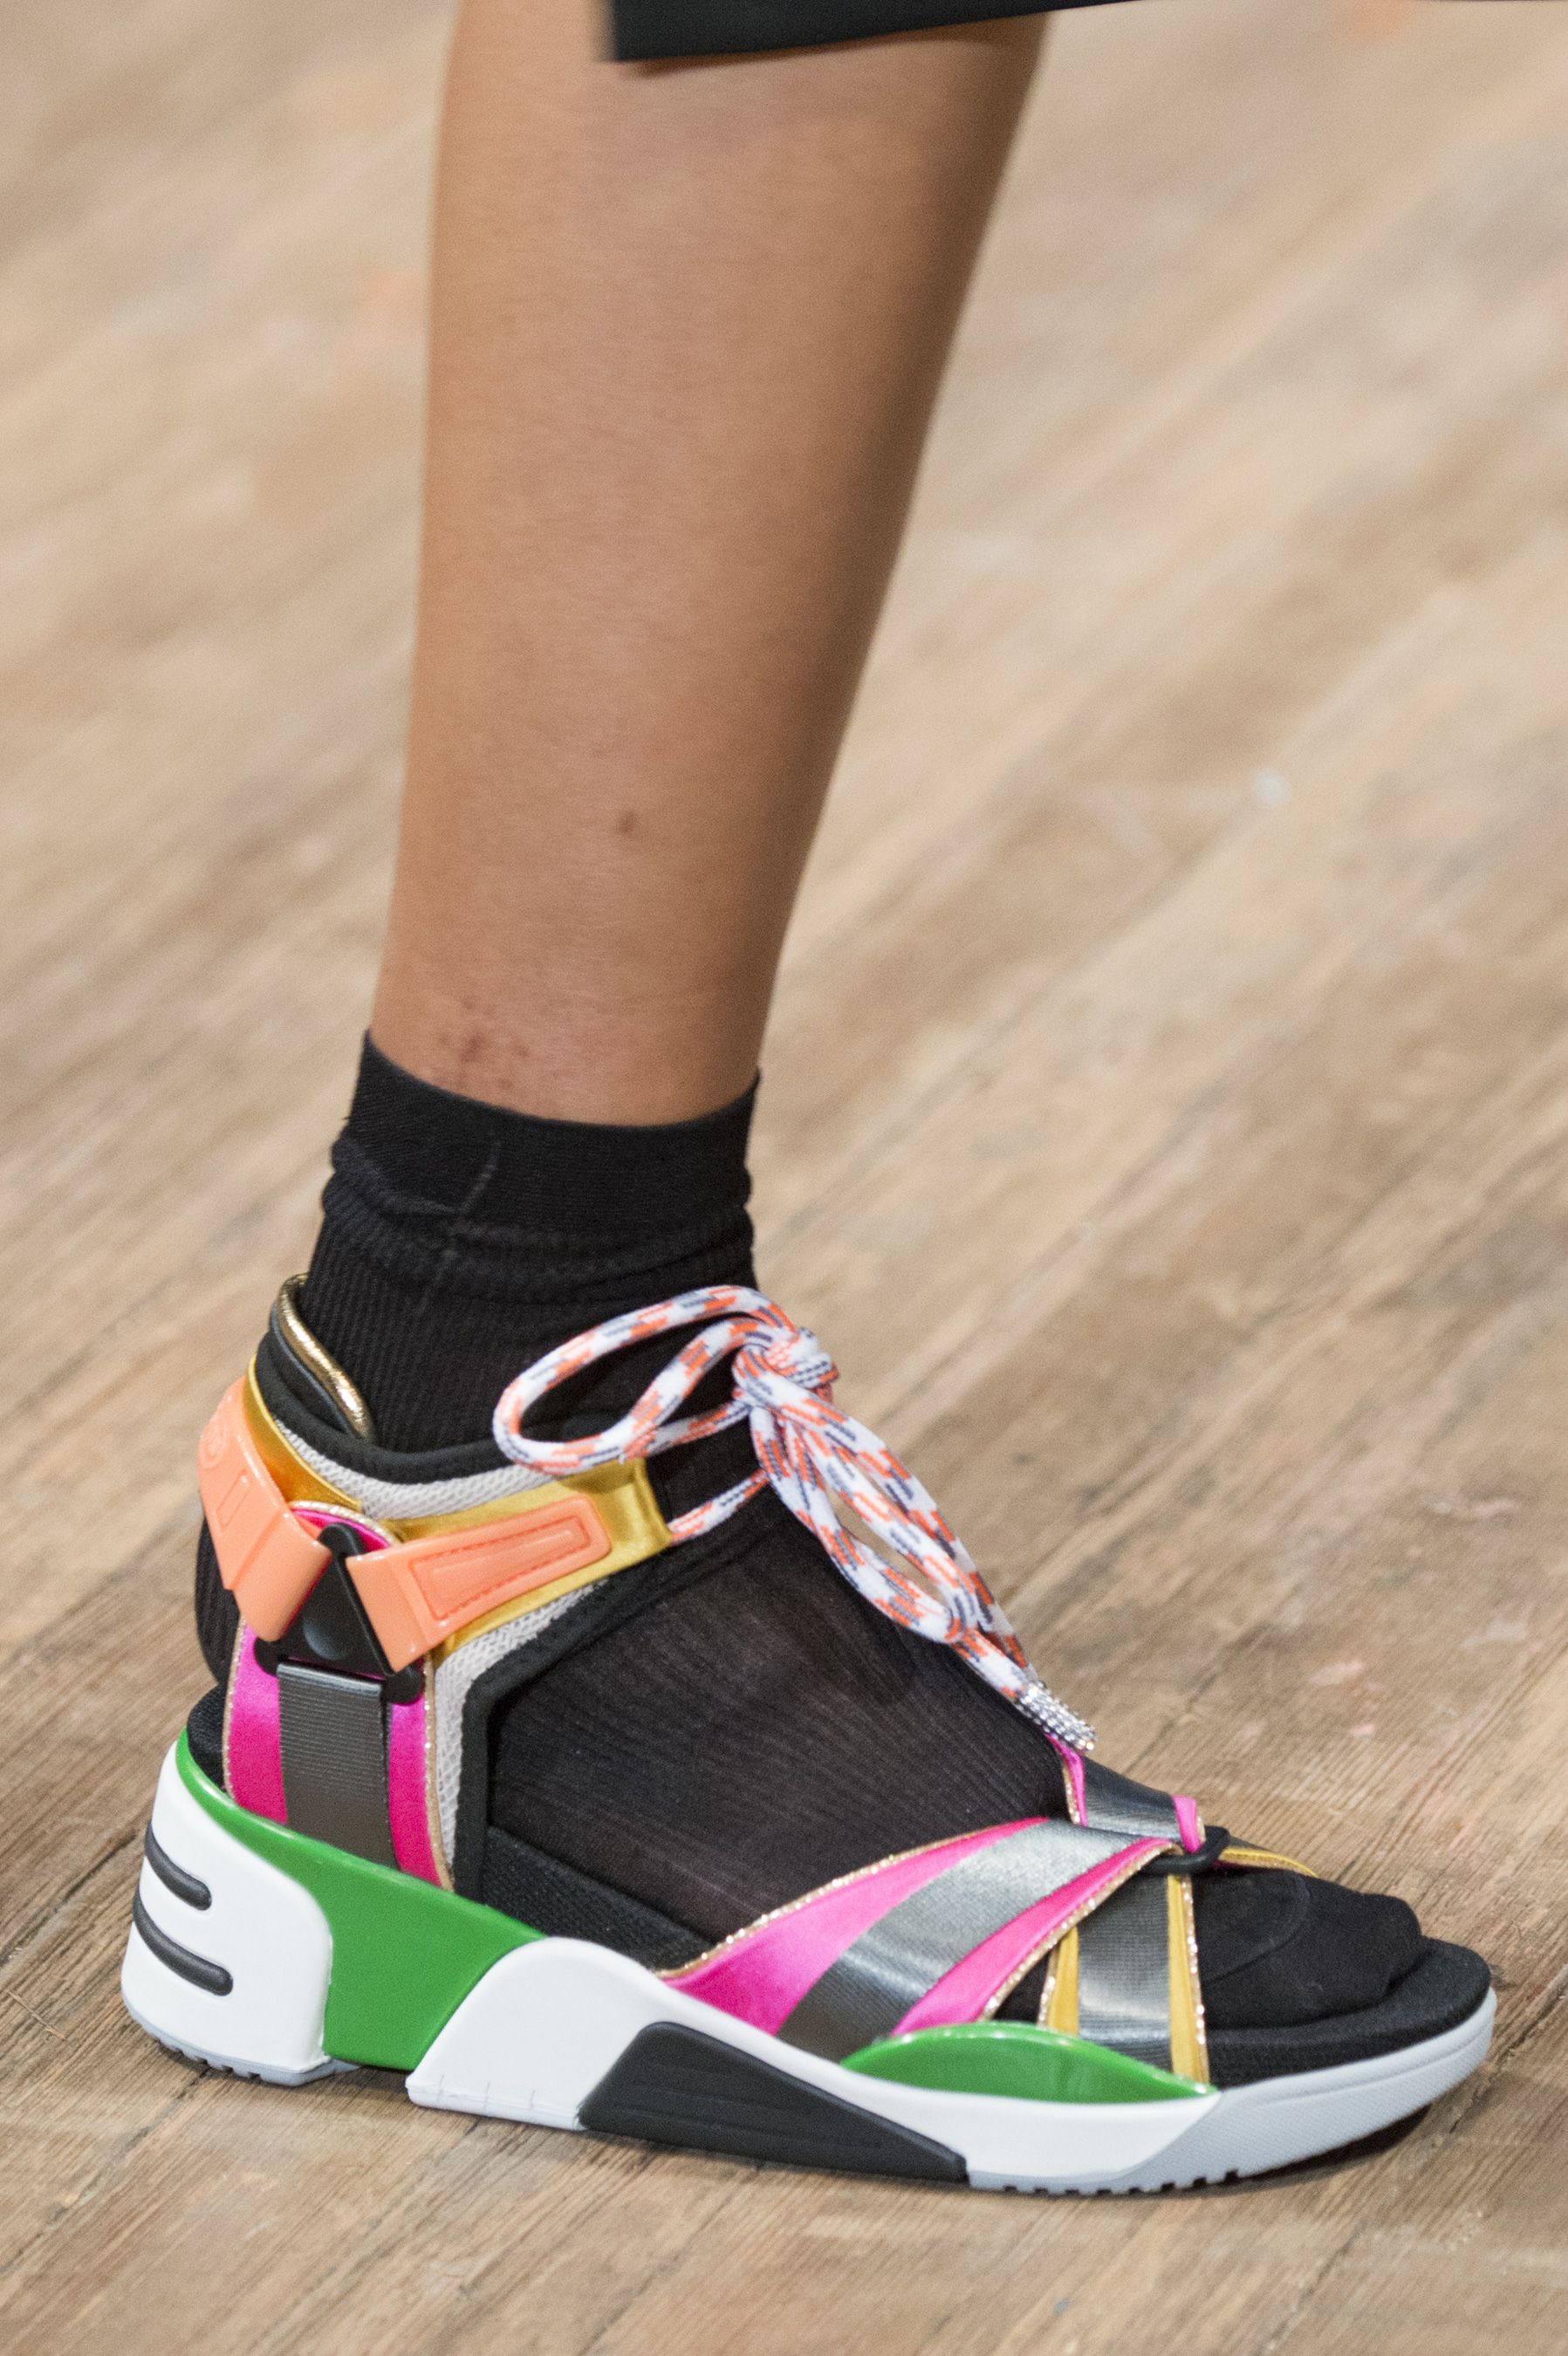 Spring 2018 Shoe Trends - The Hottest 